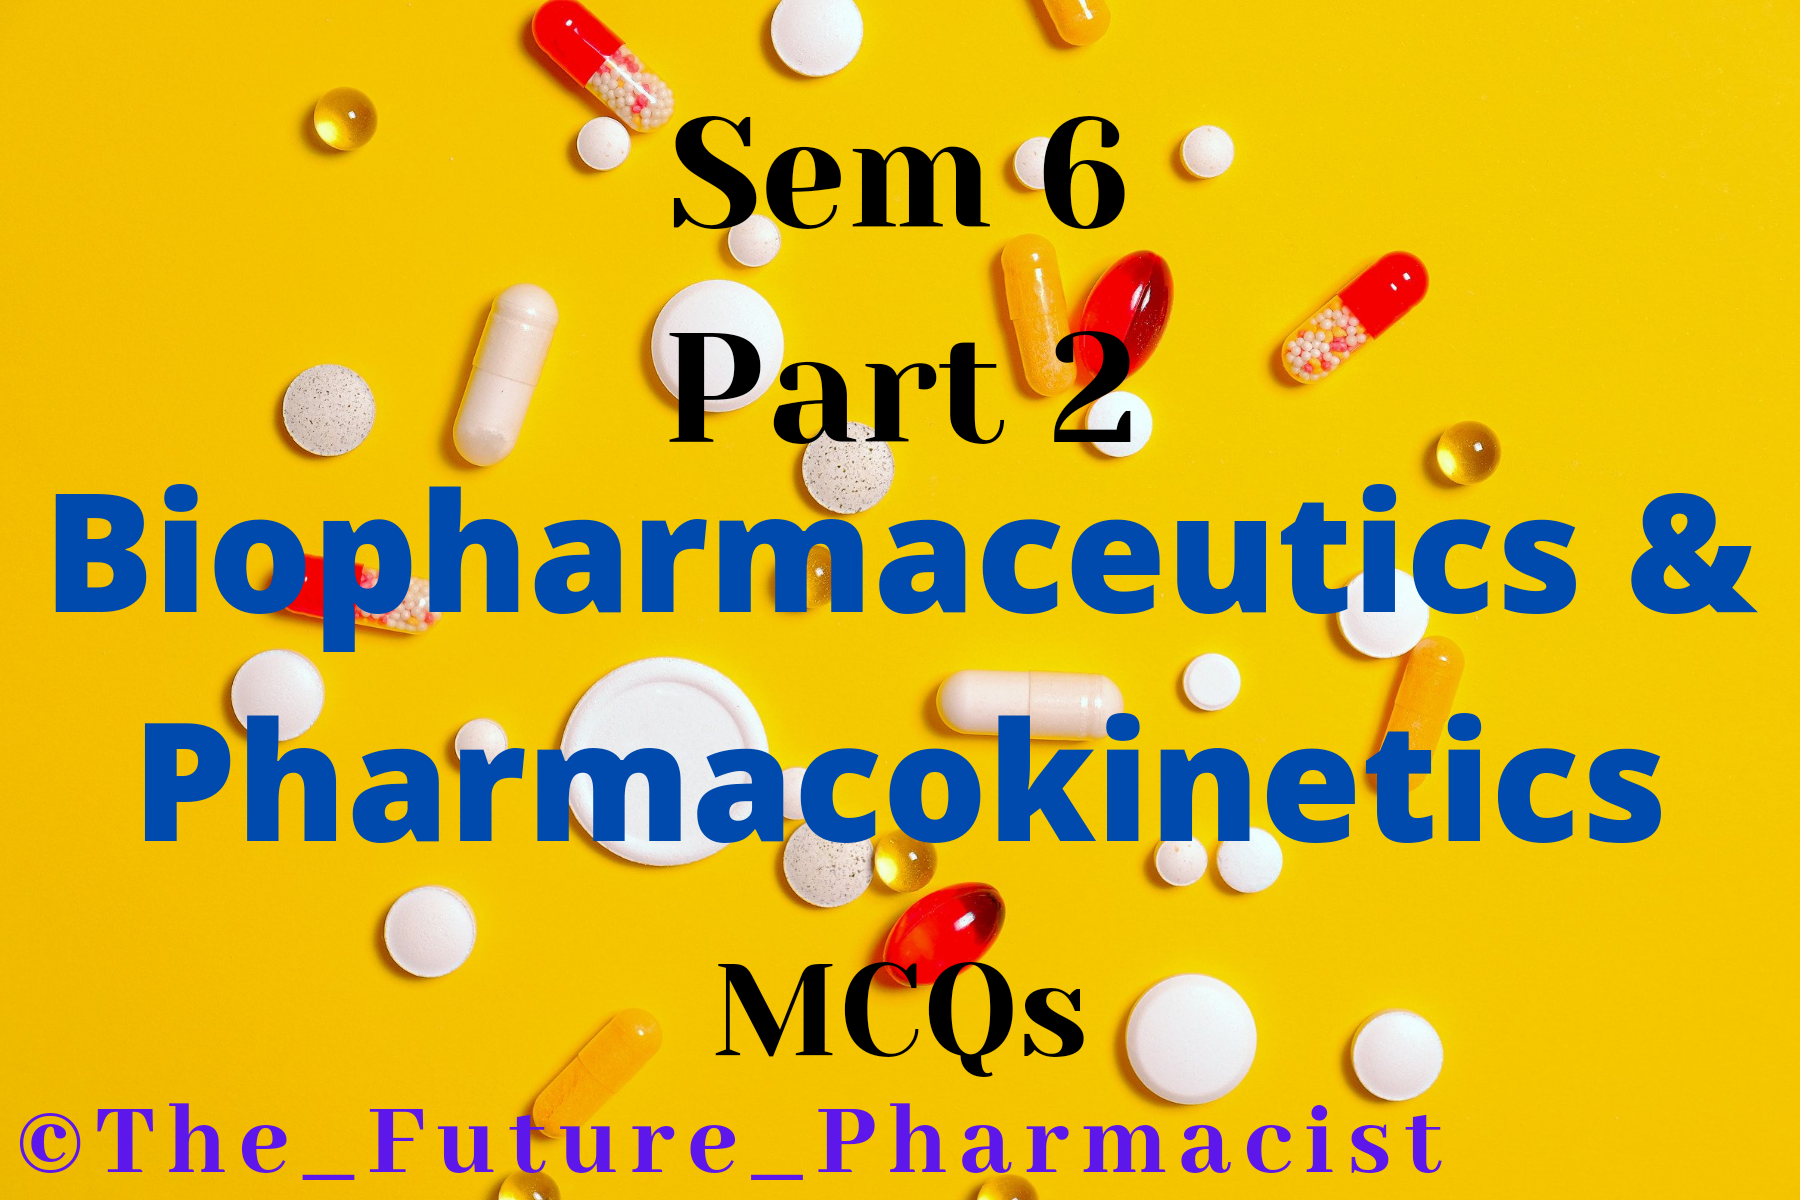 Biopharmaceutics and Pharmacokinetics sem 6 part 2 (51-100) MCQs with Answers for B pharmacy students as per PCI Syllabus | Free MCQs for GPAT and NIPER